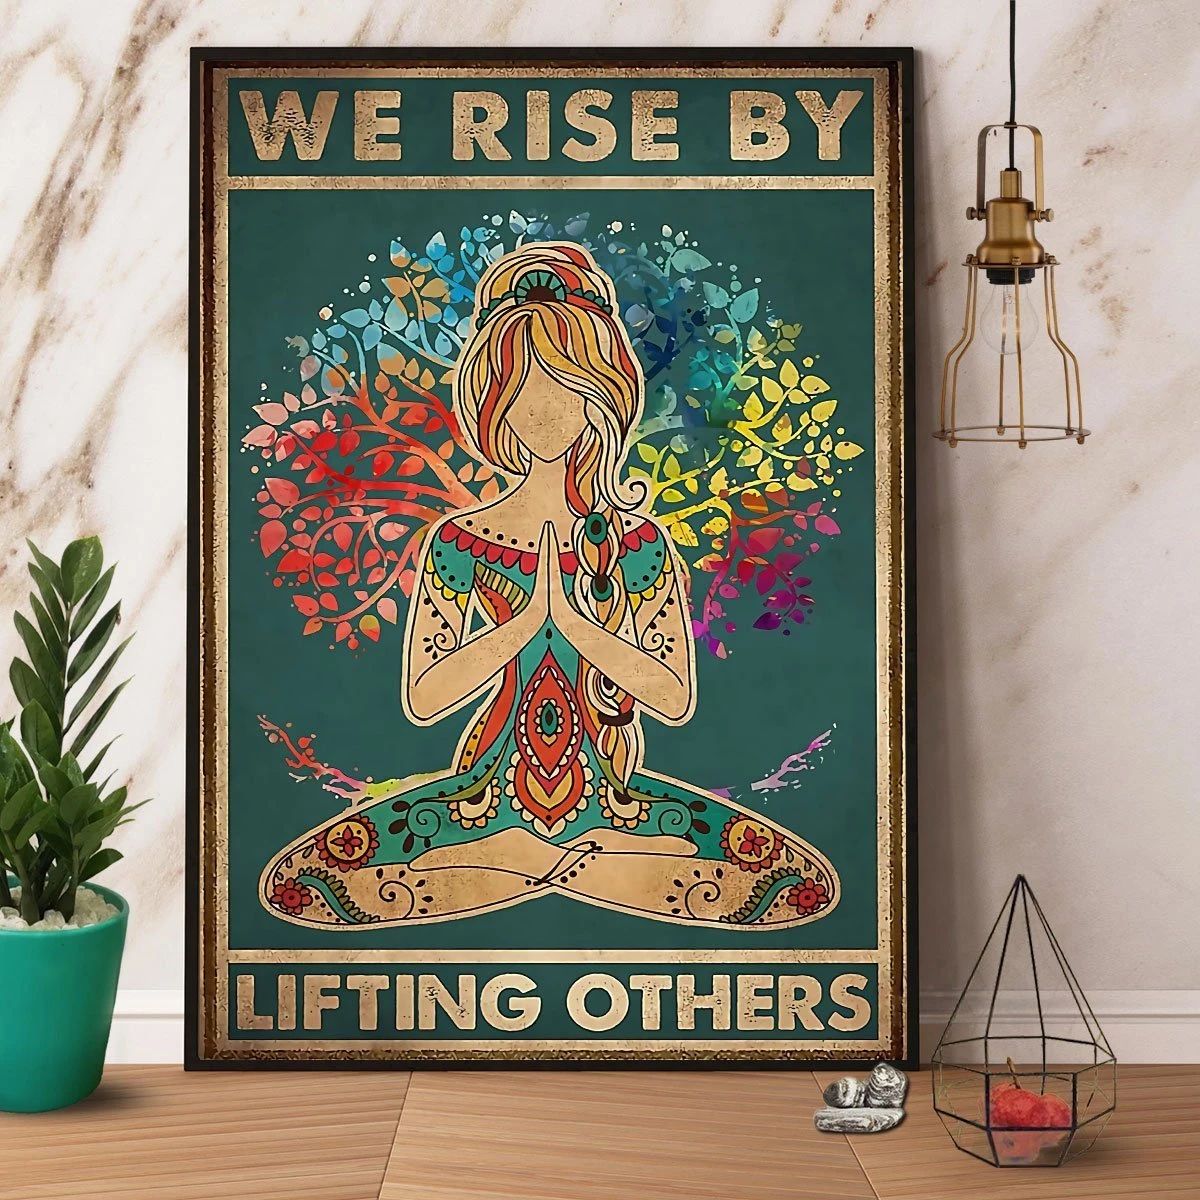 Yoga We Rise By Lifting Others Satin Canvas Prints Poster Wall Art Decor